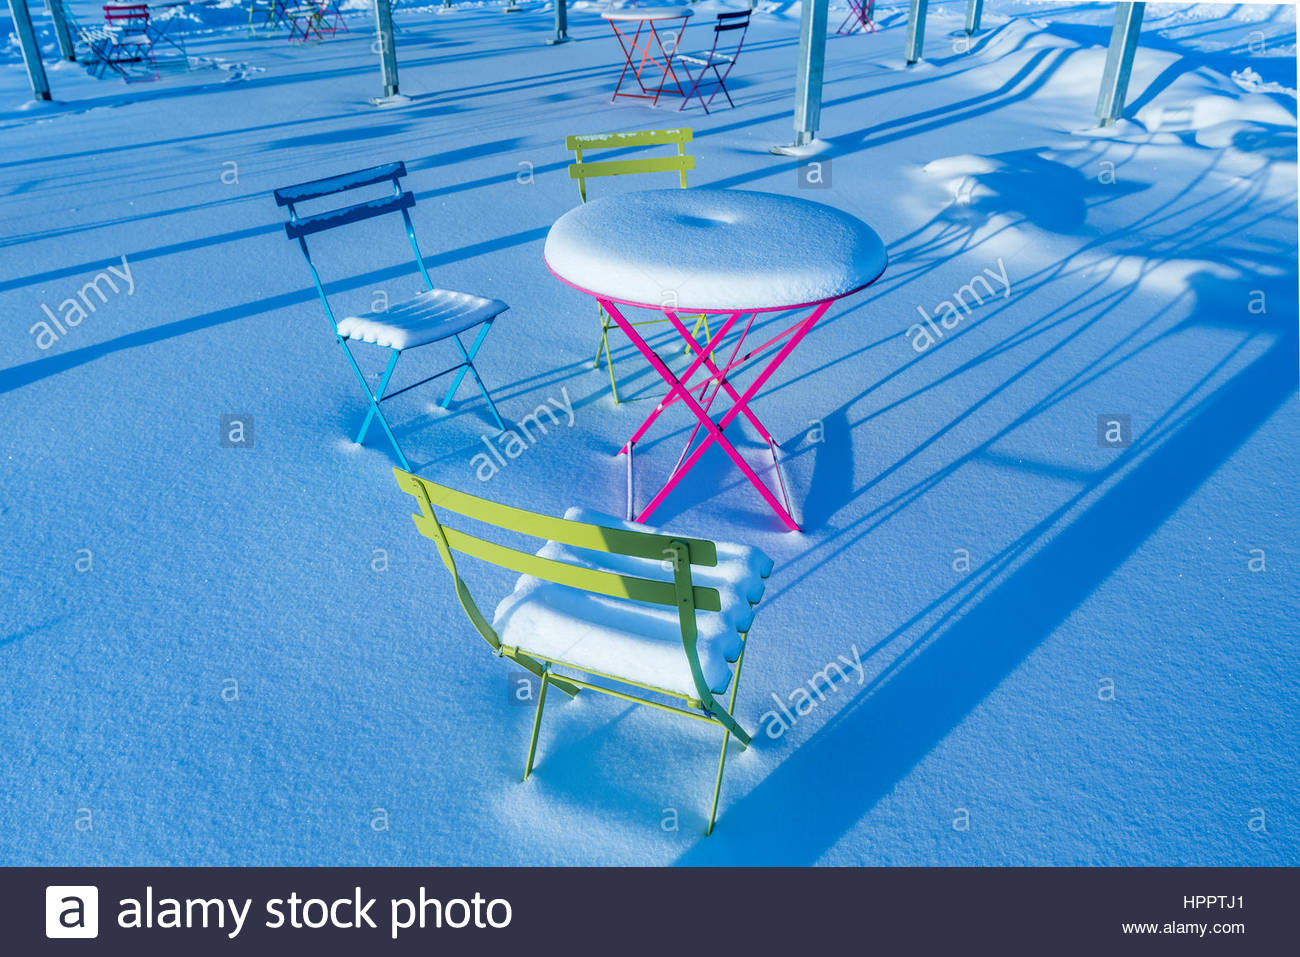 Patio Tables With Snow St Patricks Island Park Calgary intended for proportions 1300 X 957